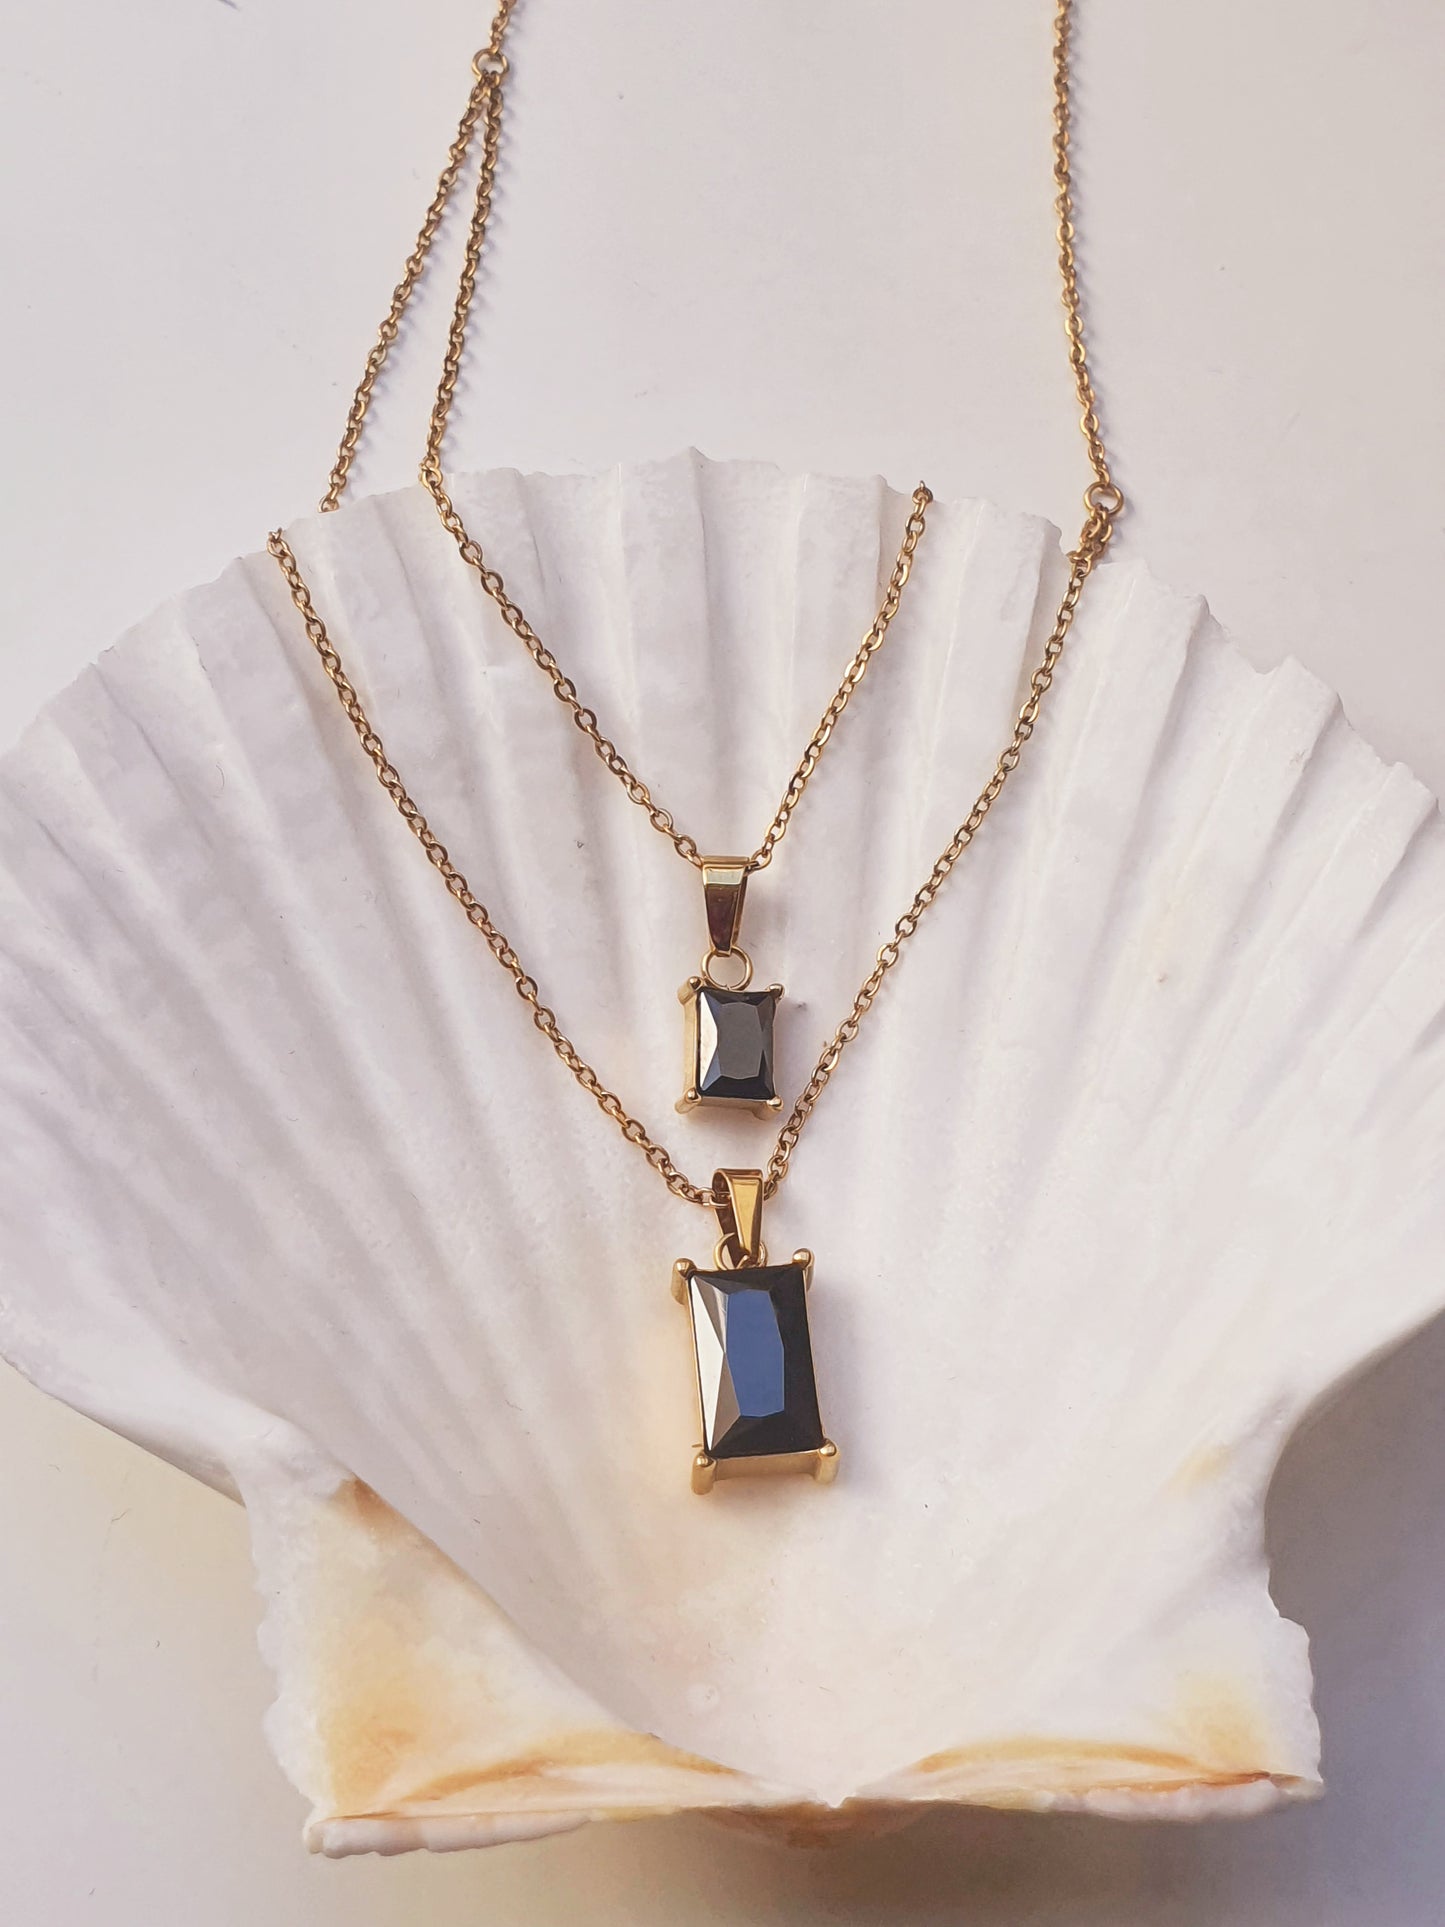 A gold double layered necklace with two black rectangle jewel pendants rests on a large white shell